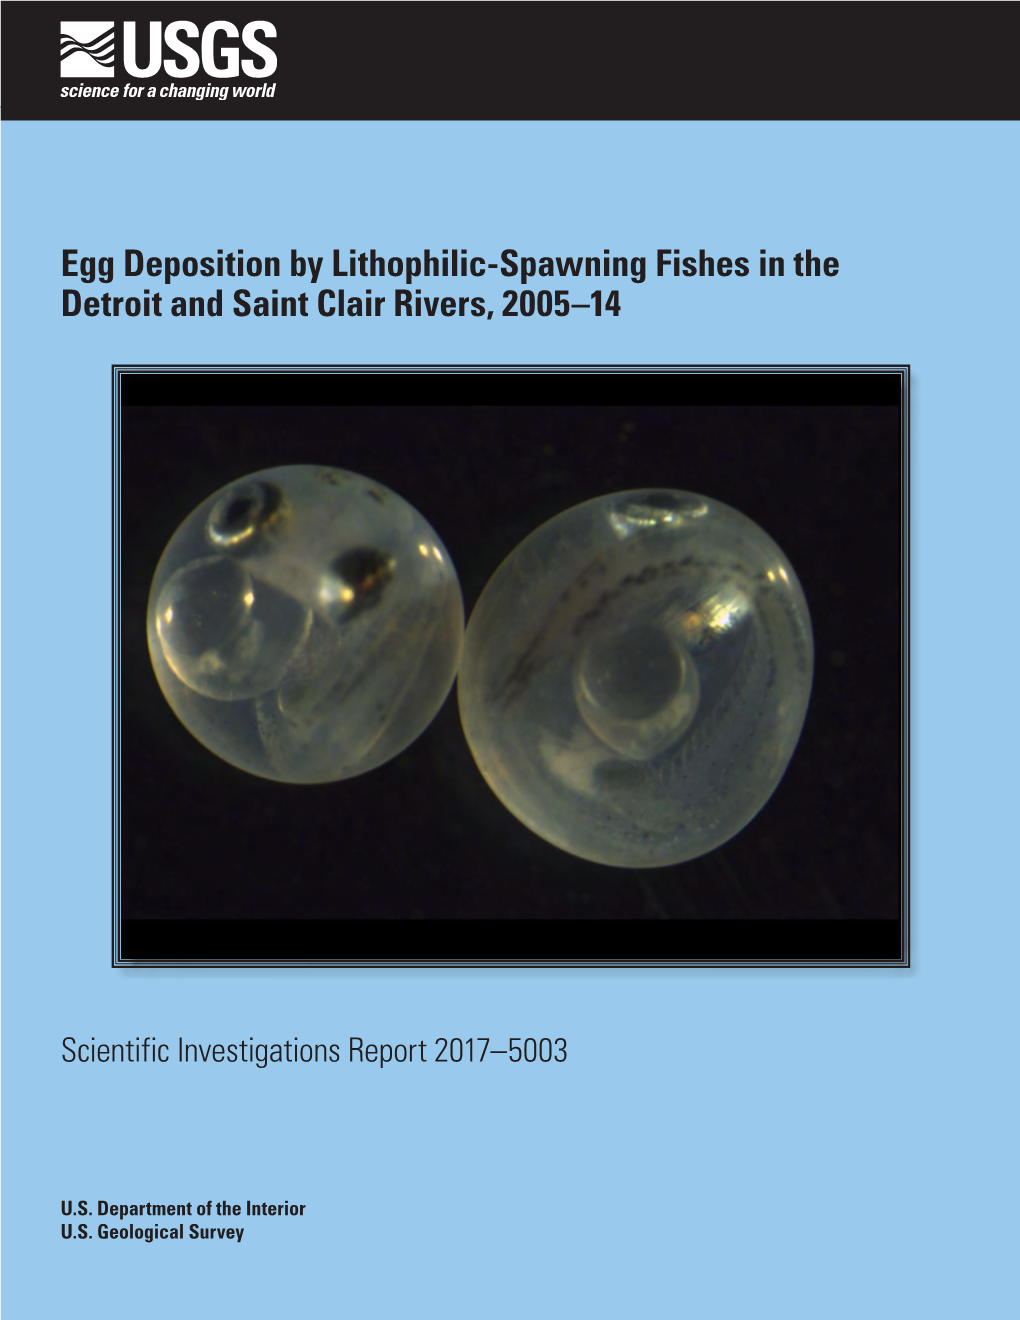 Egg Deposition by Lithophilic-Spawning Fishes in the Detroit and Saint Clair Rivers, 2005–14